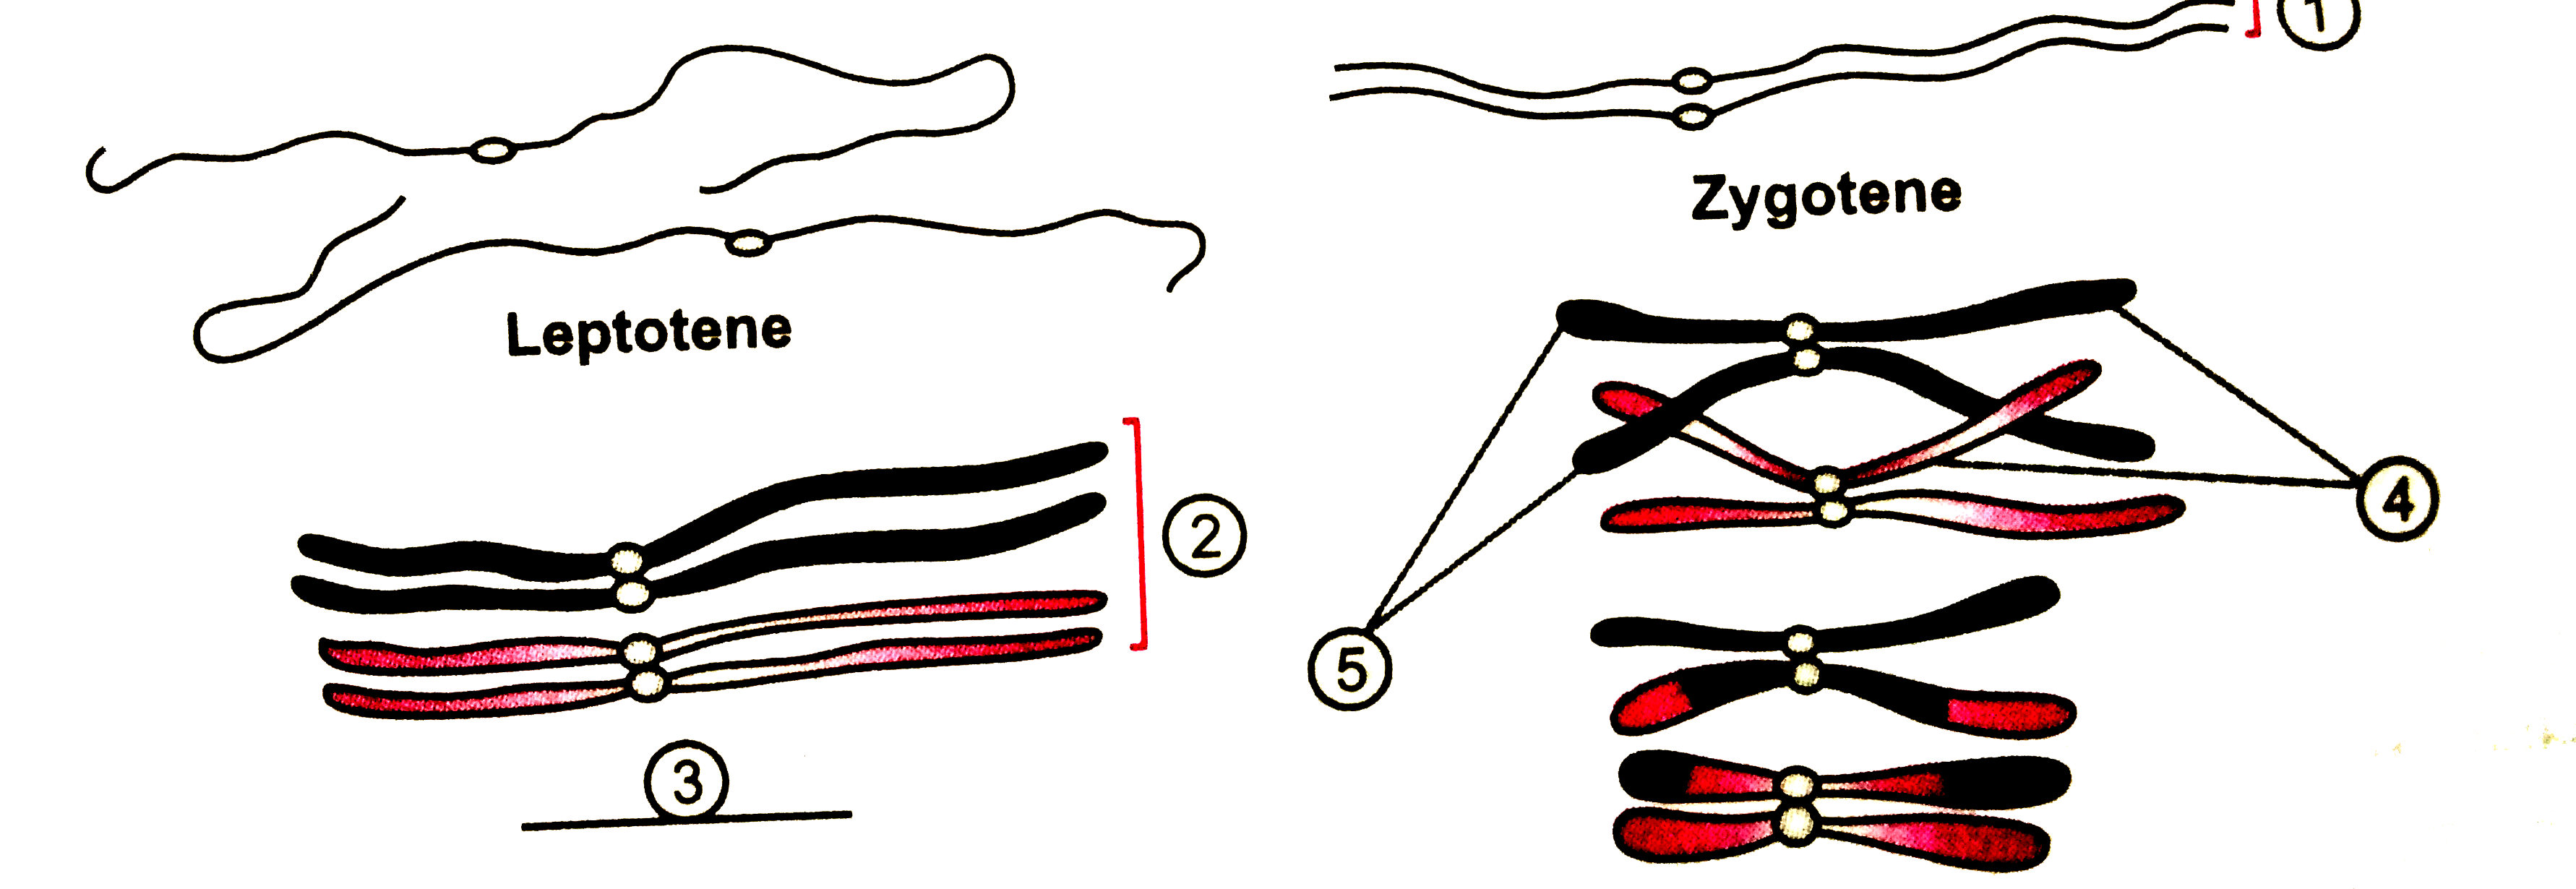 Study the following diagrams(depicting behaviour of chromosomes in meiosis)carefully and label the point 1,2,3,4 and 5.